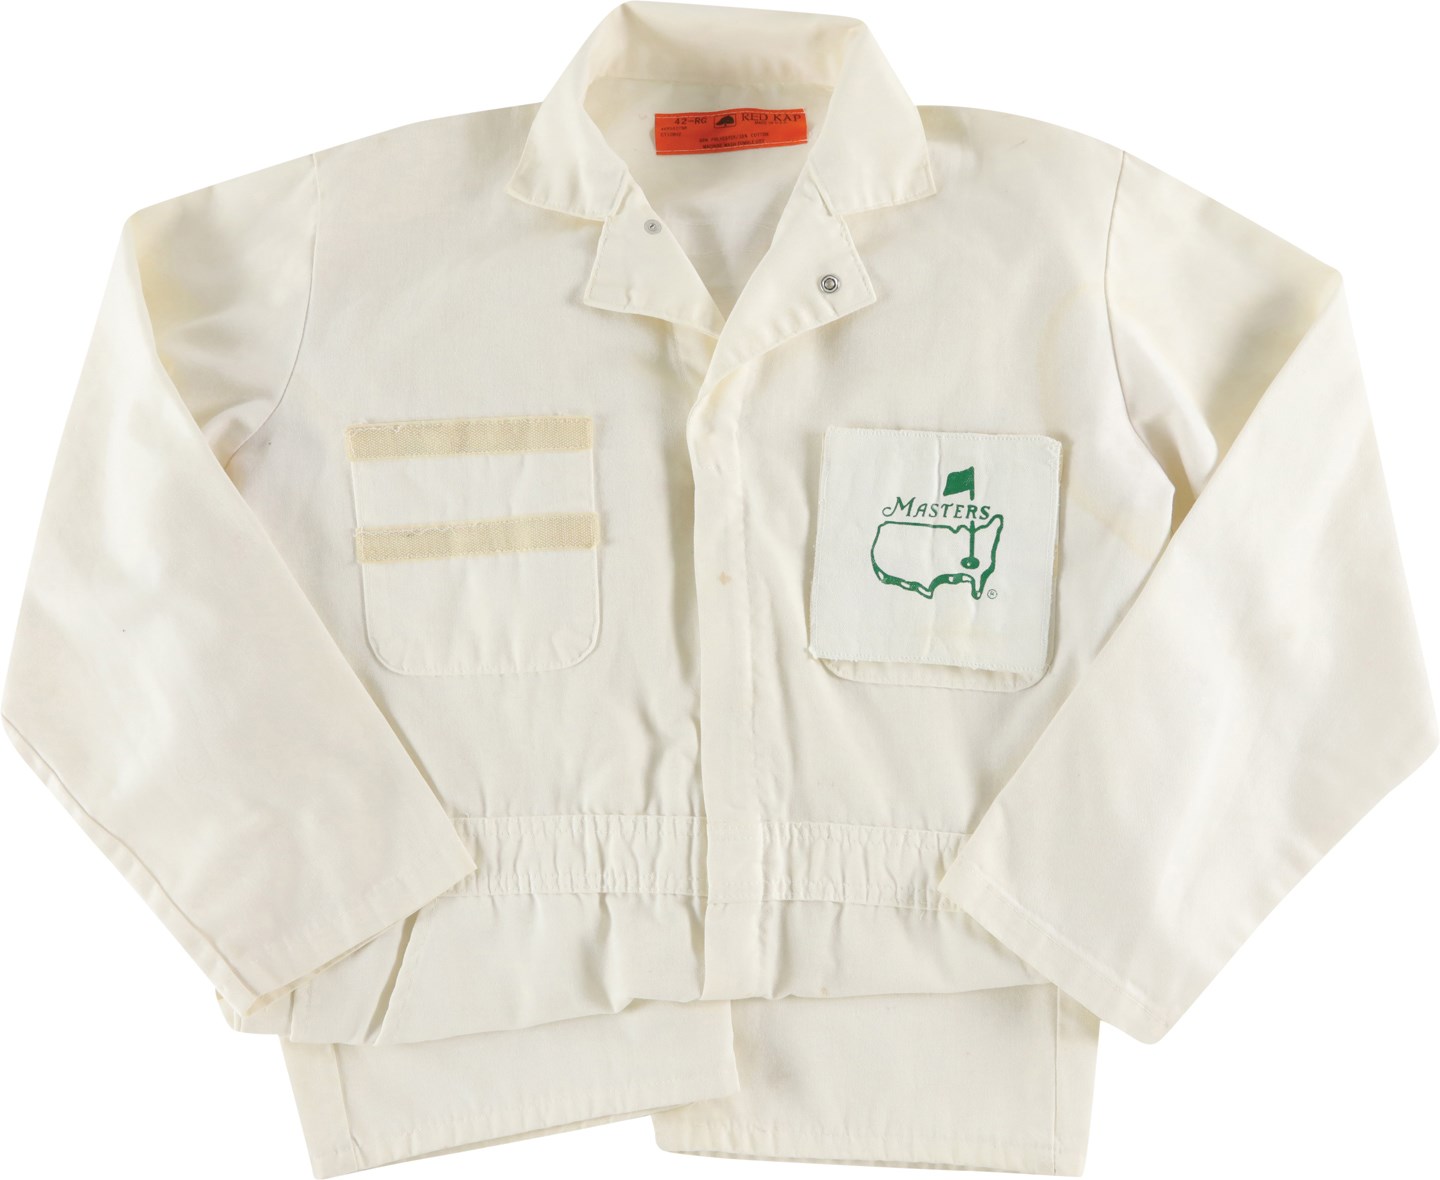 Olympics and All Sports - 1998 Masters Jeff Maggert Caddy Uniform